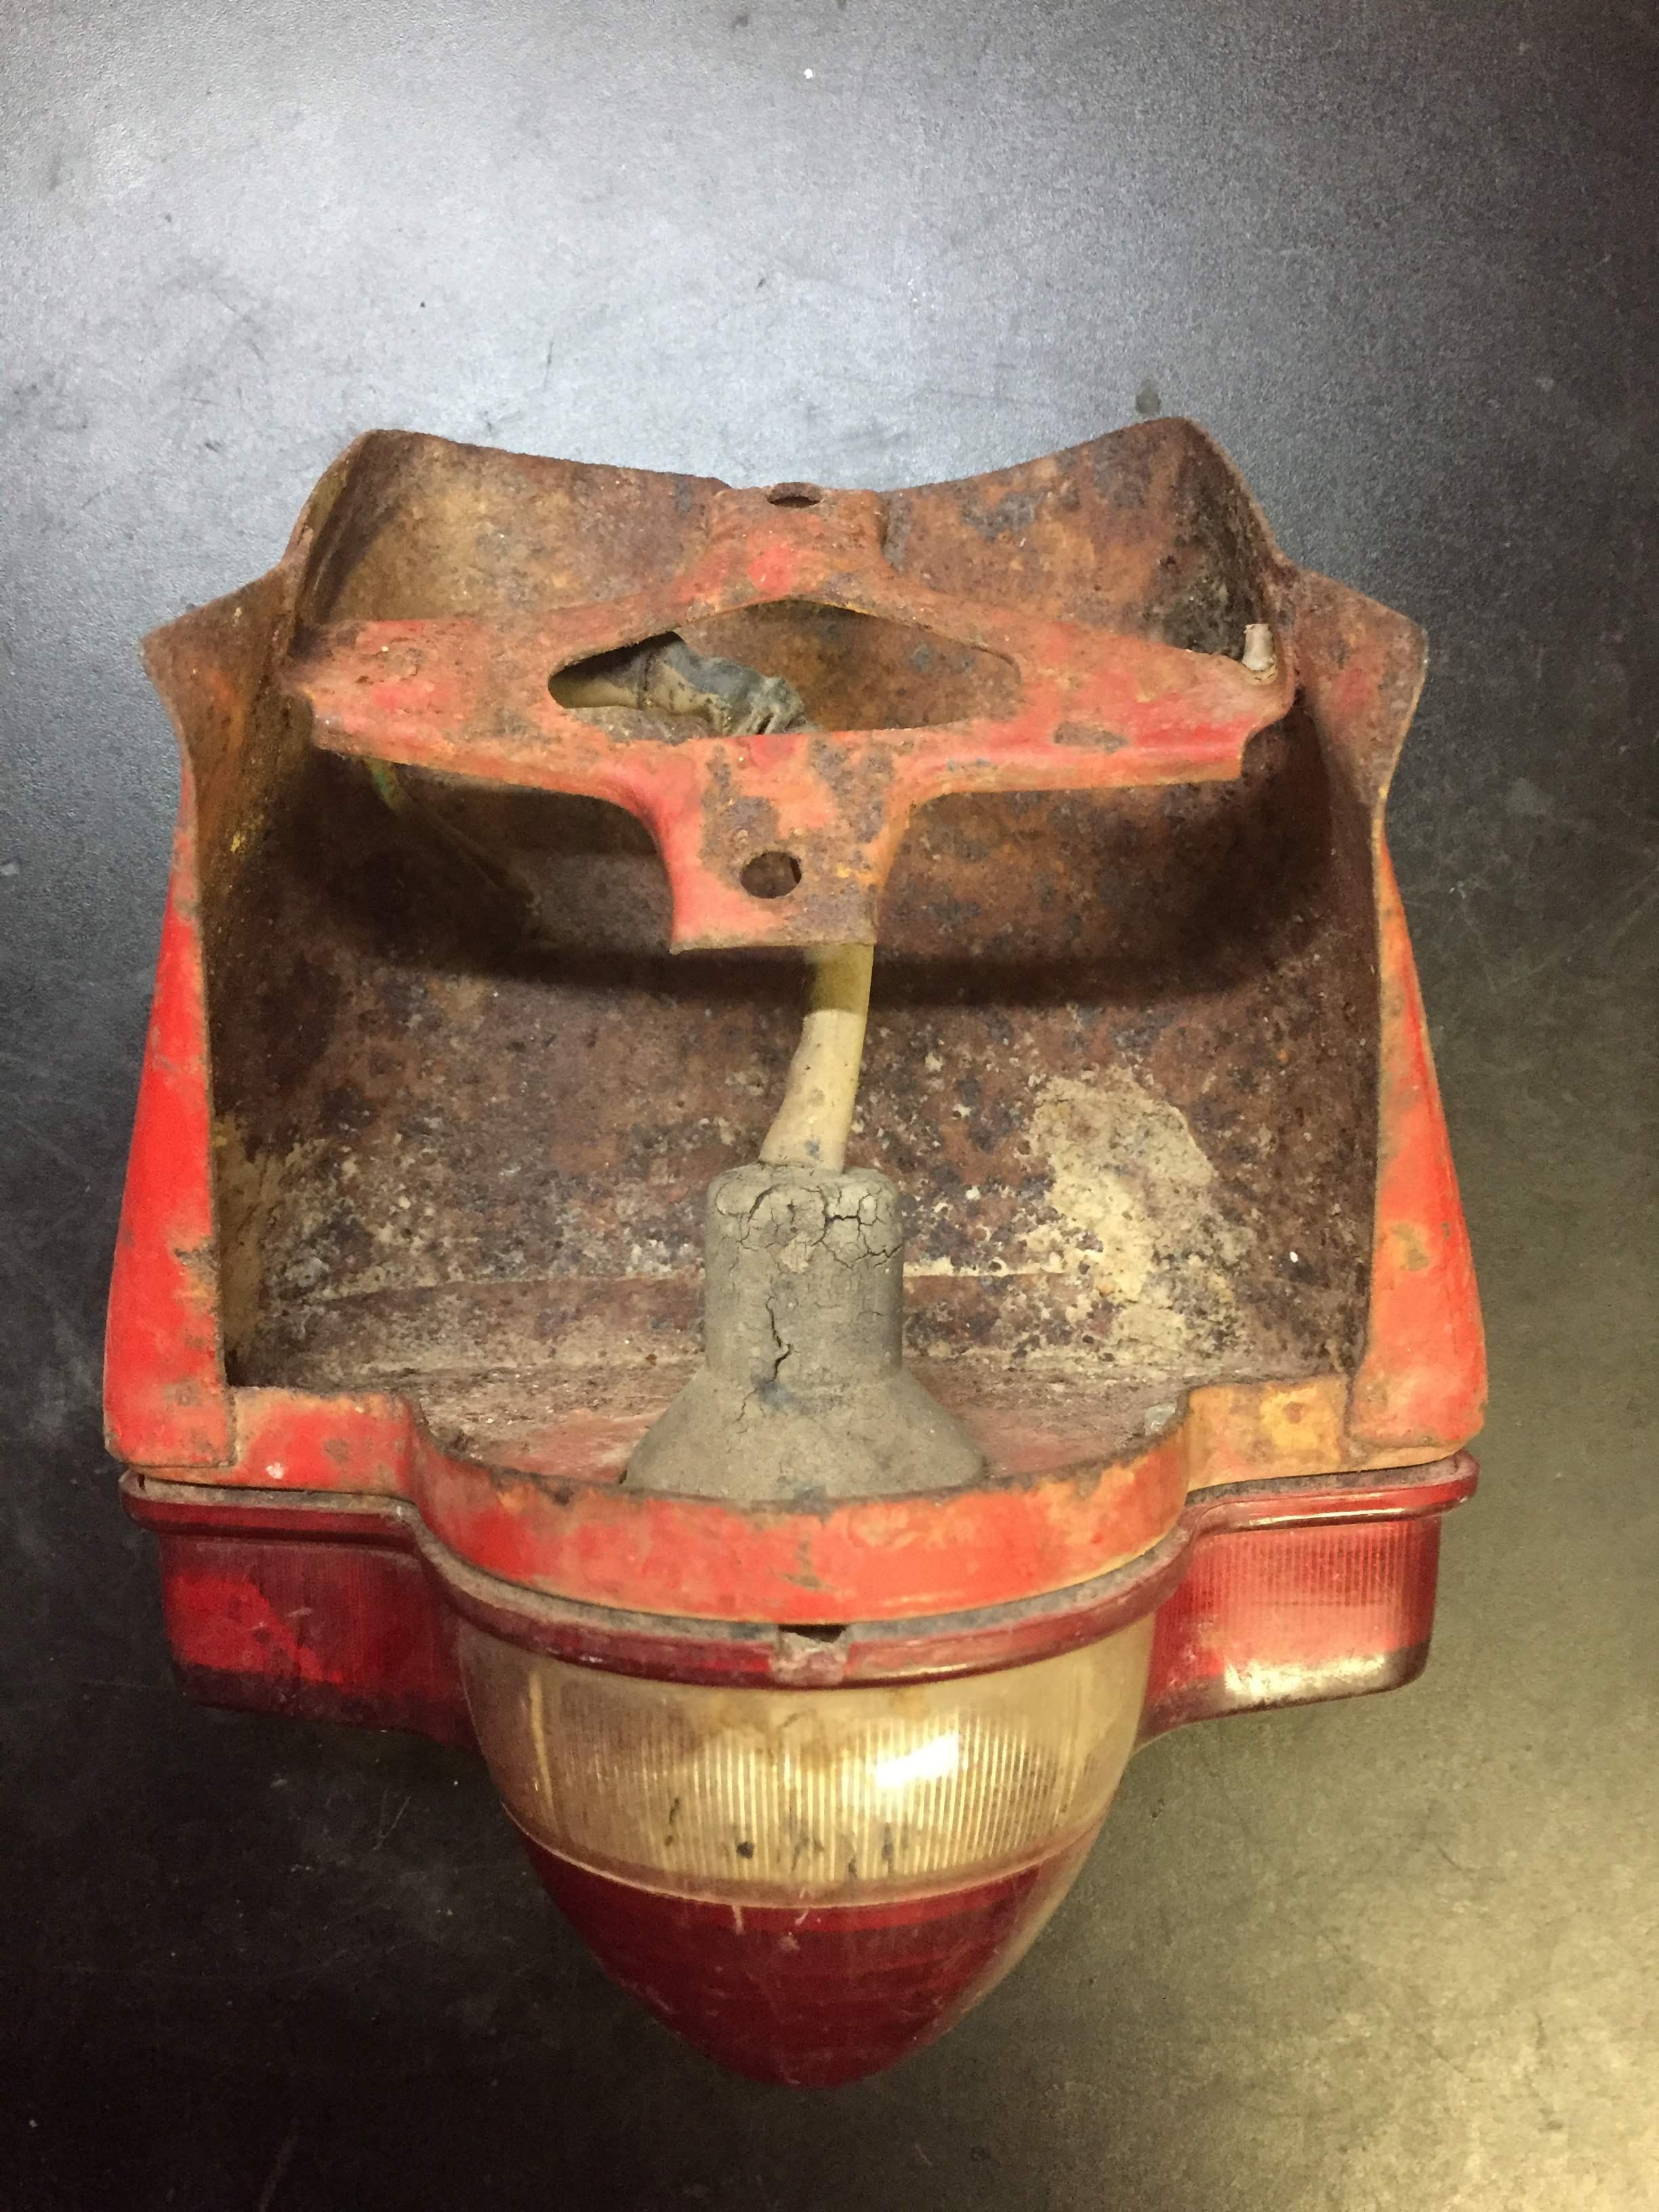 364.2.55.815.2 Allstate Compact Puch Taillight